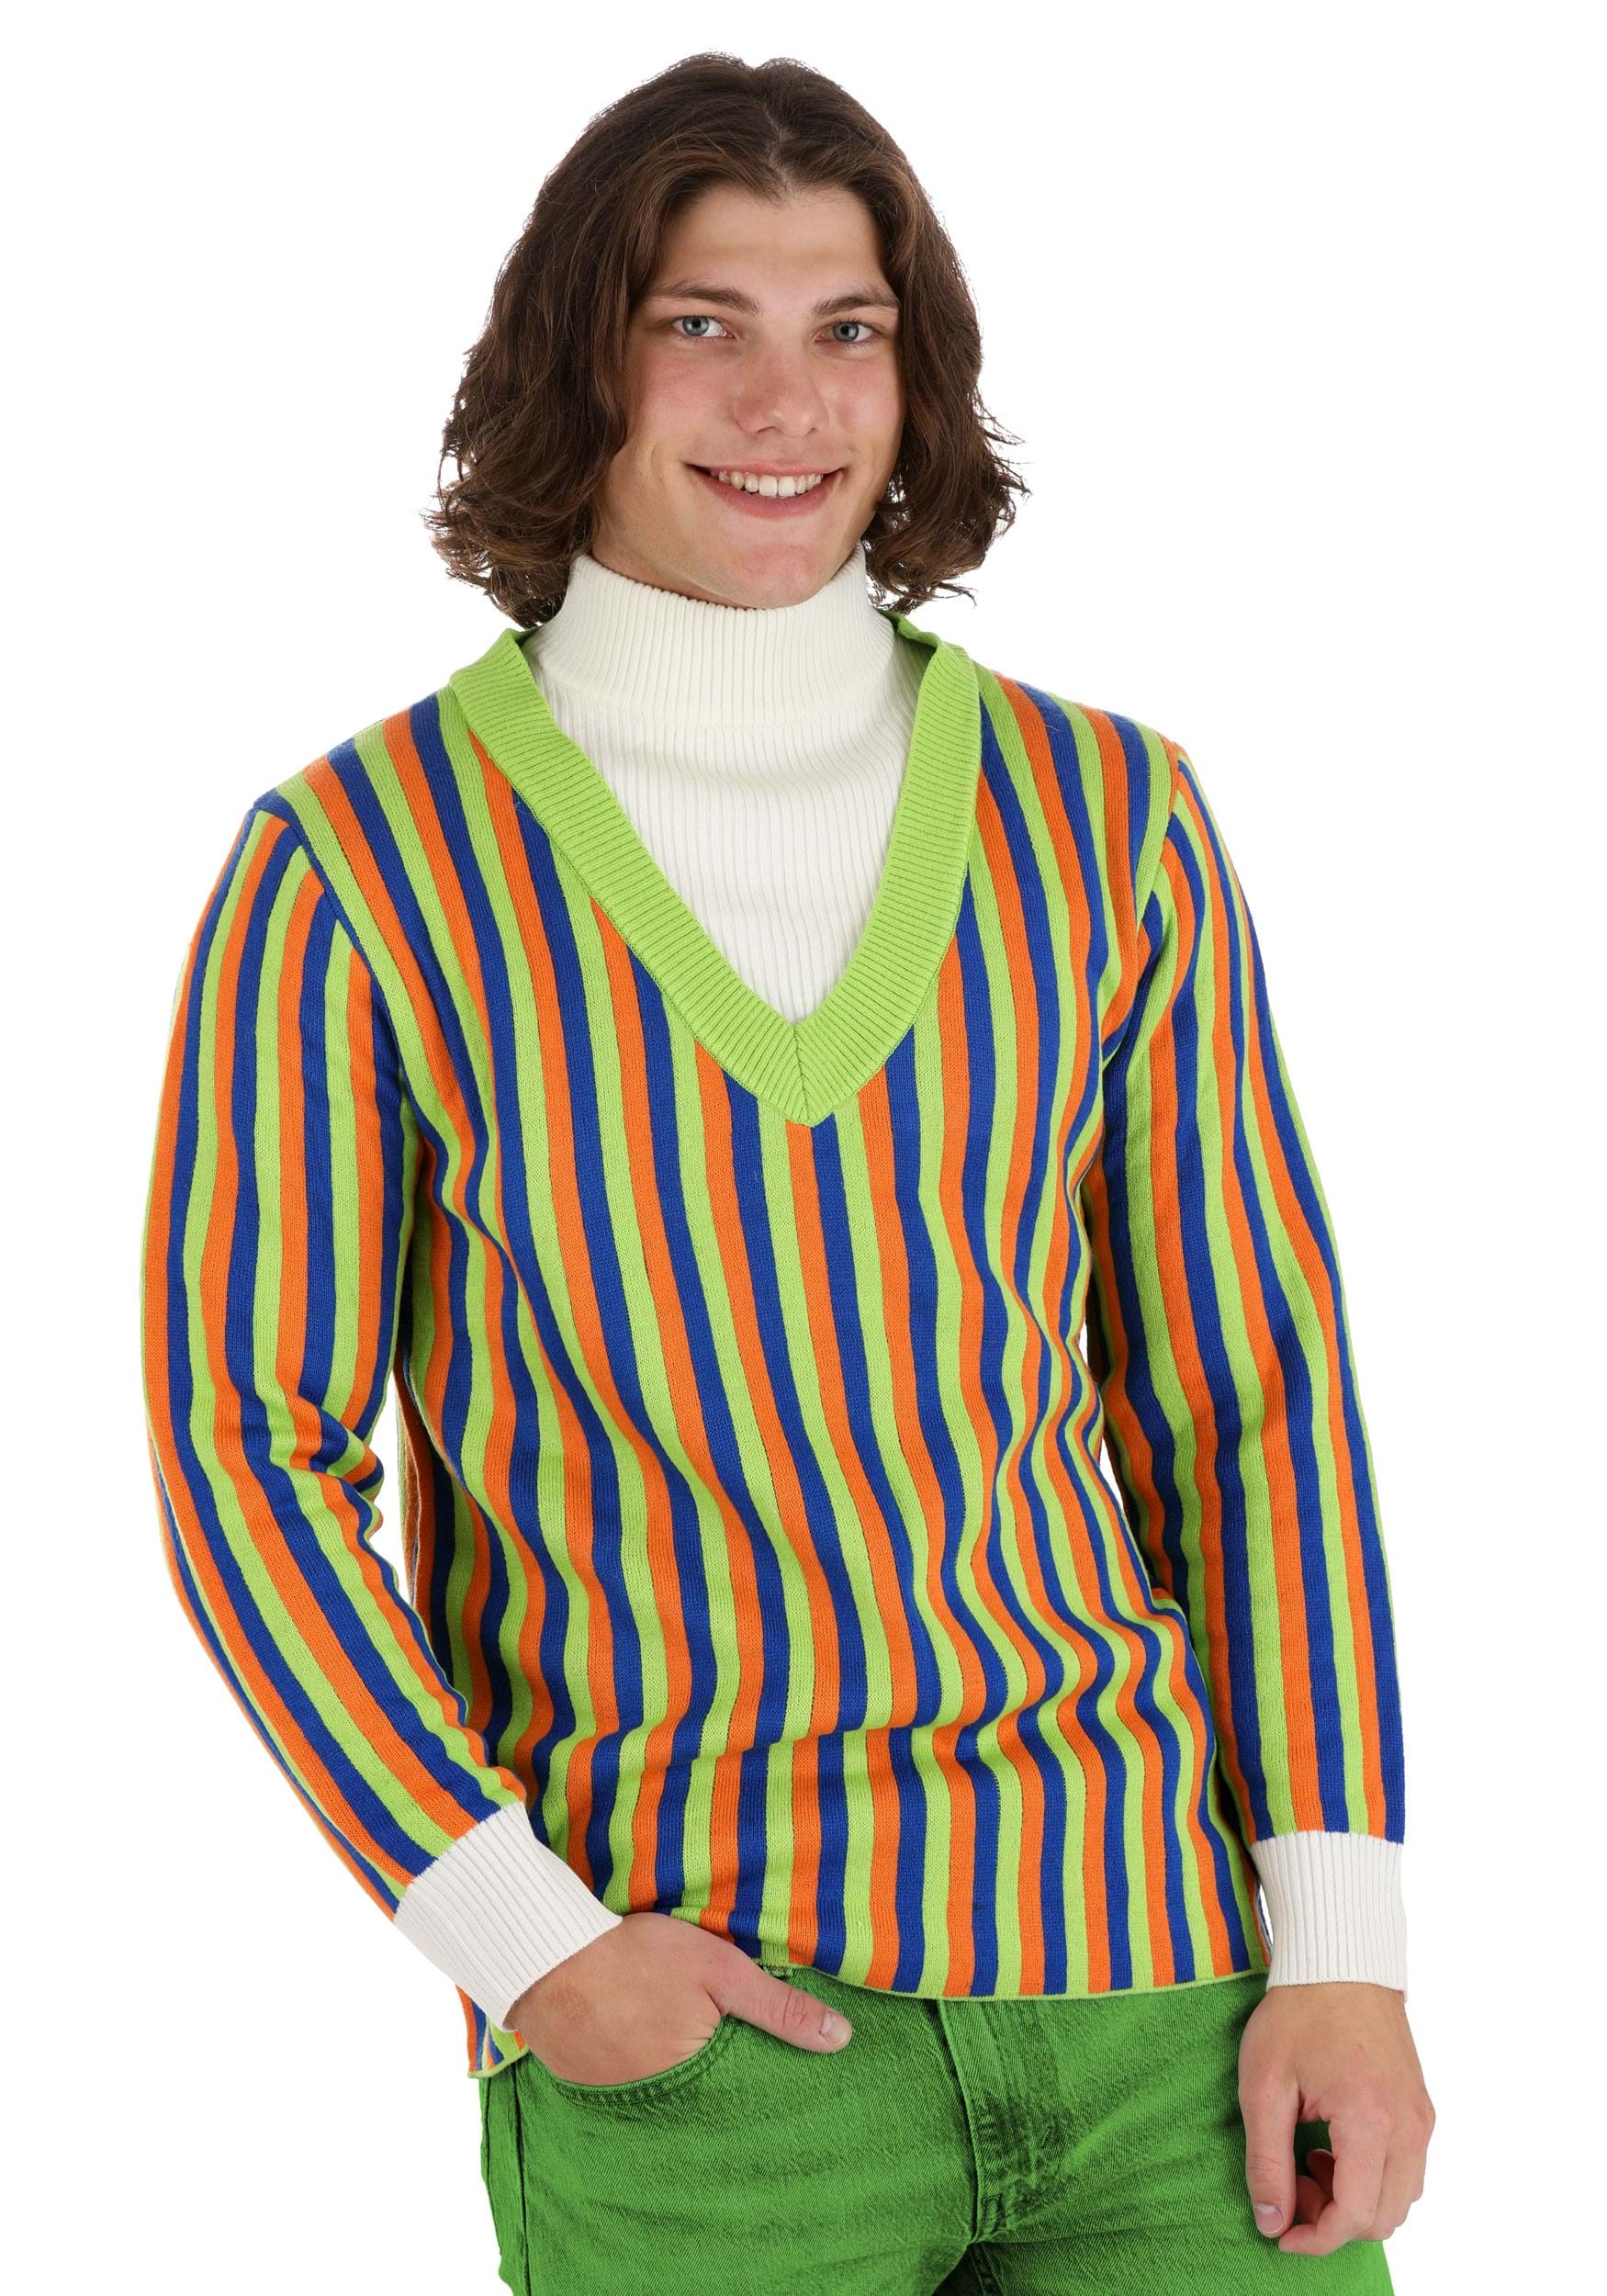 Bert Cosplay Knit Sweater for Adults